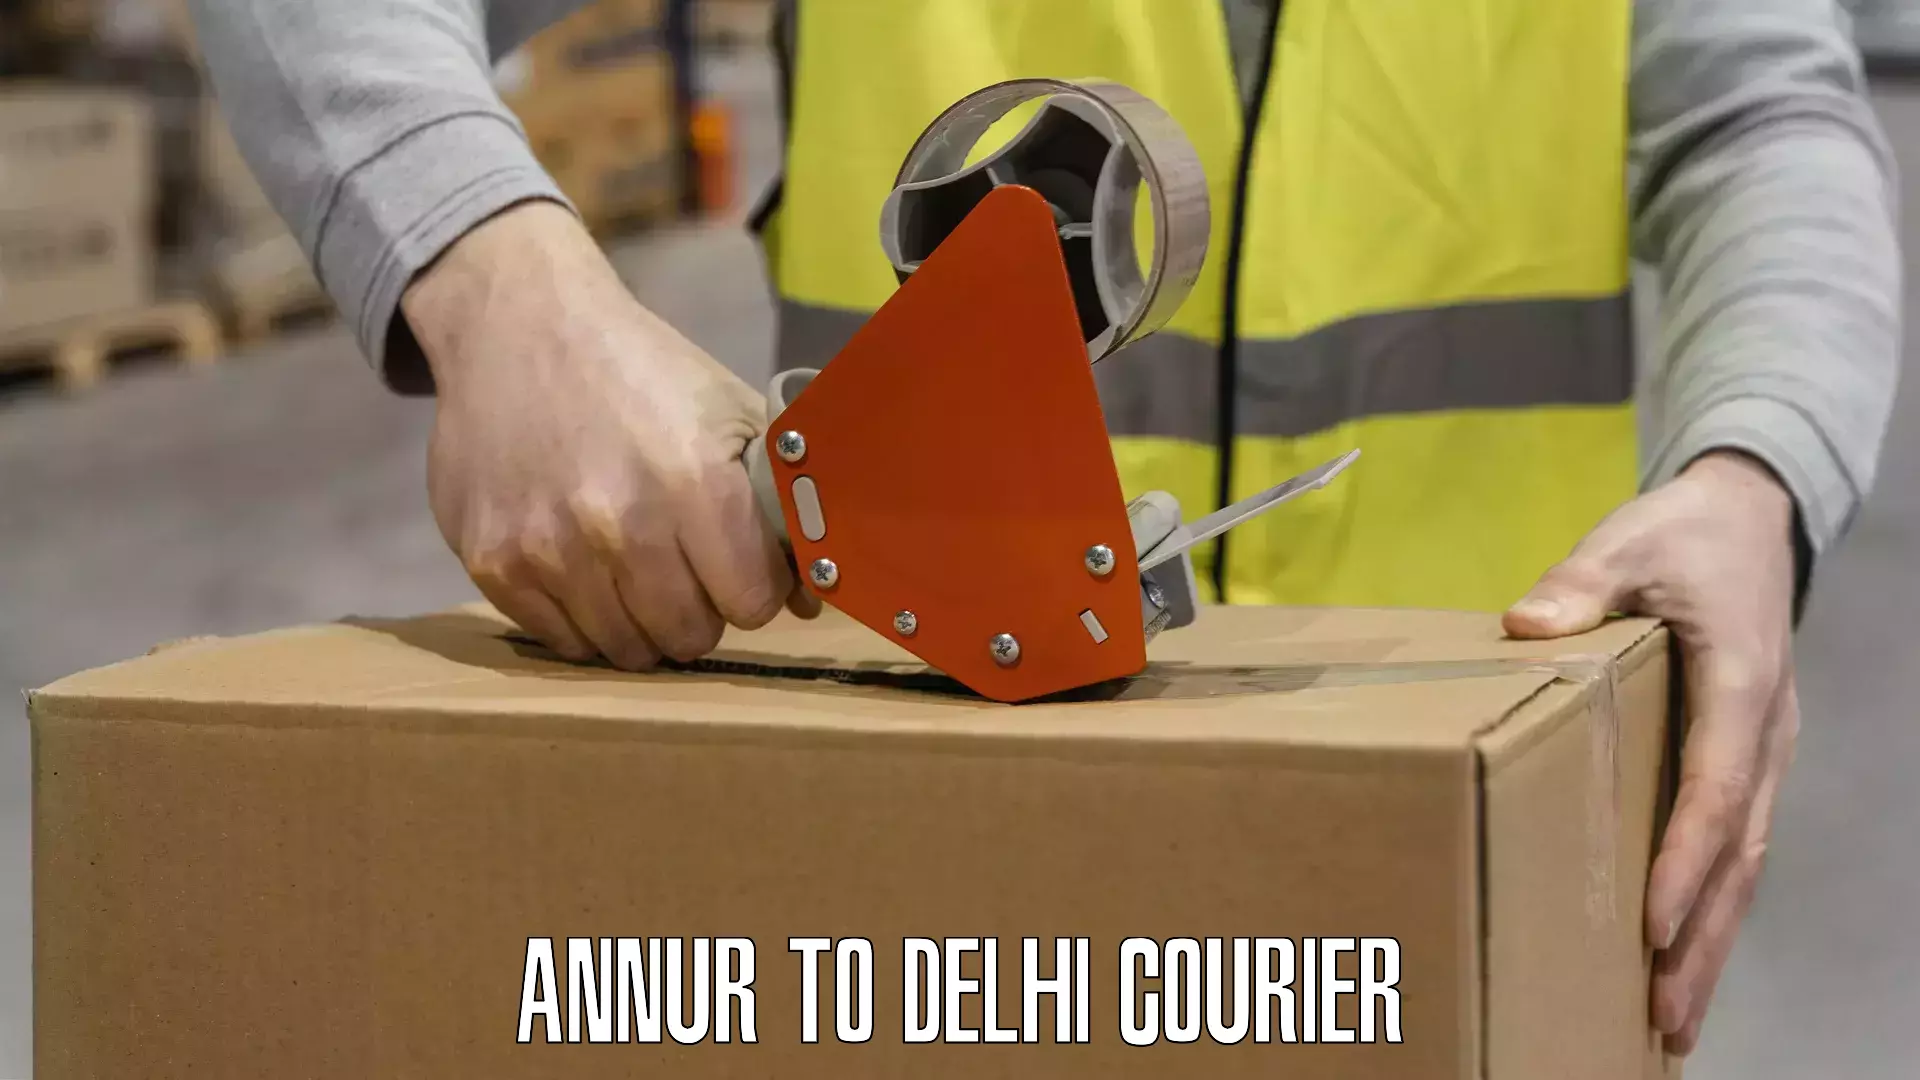 Large package courier Annur to Jamia Hamdard New Delhi